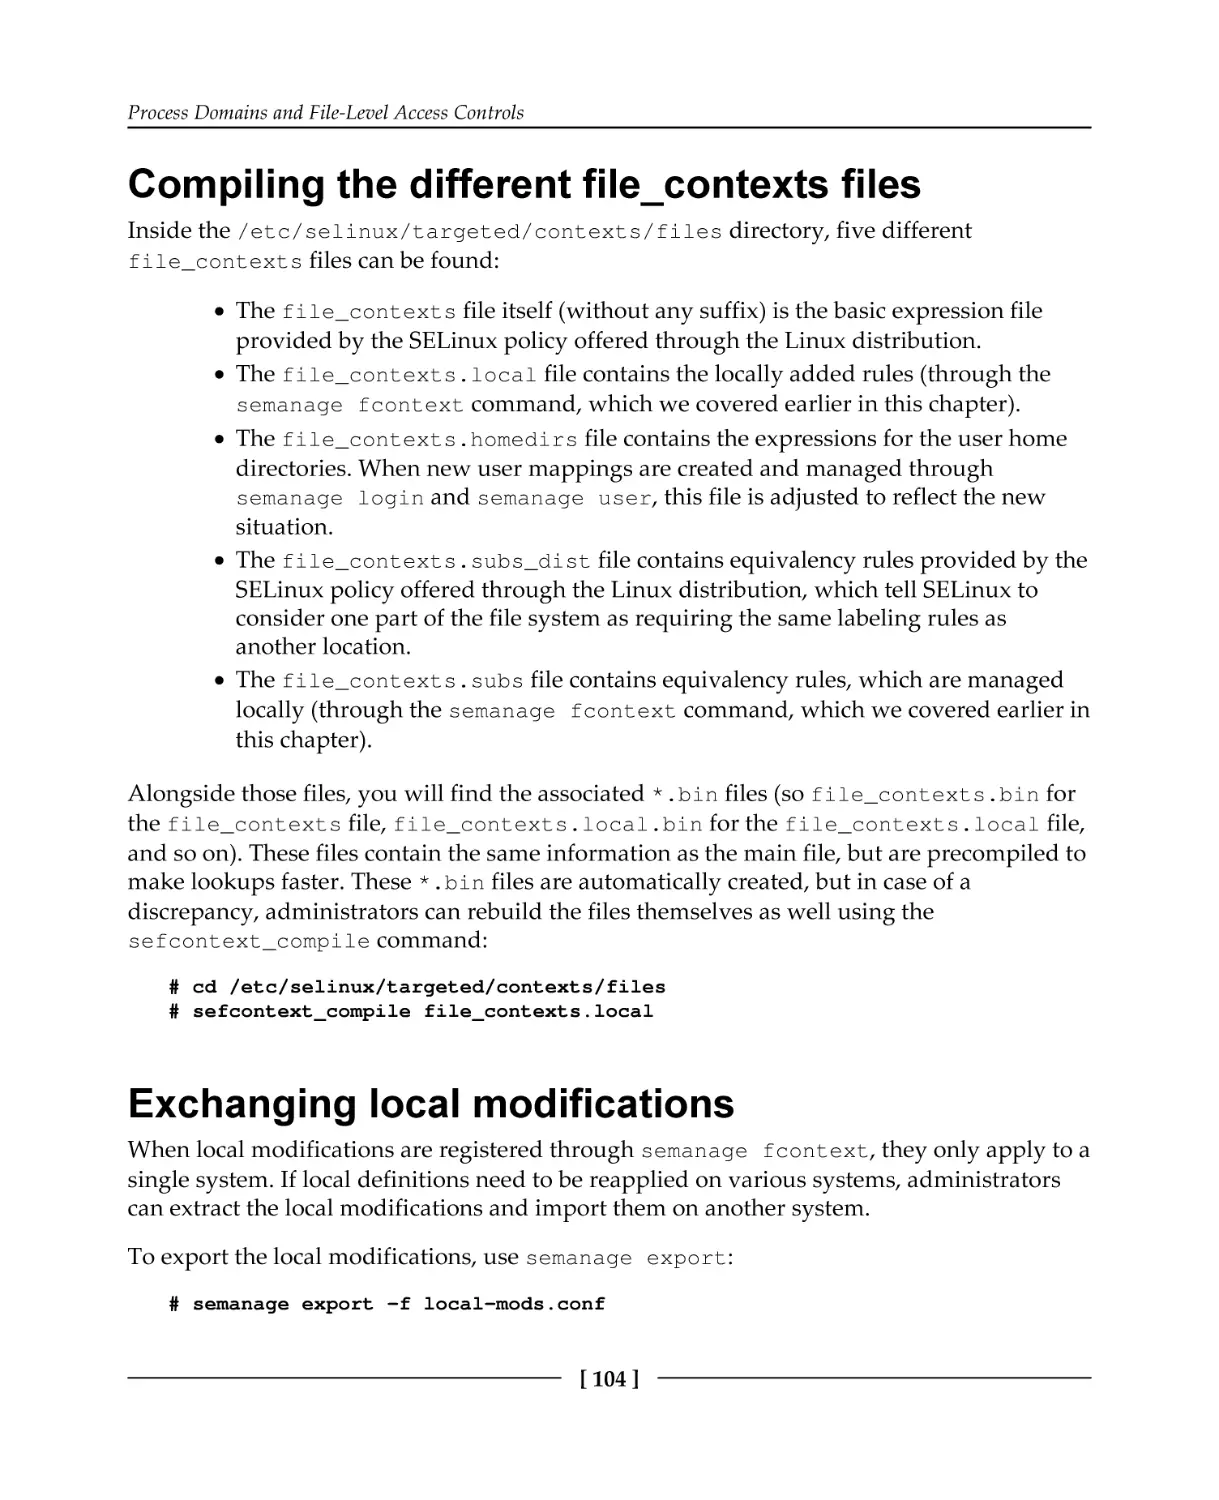 Compiling the different file_contexts files
Exchanging local modifications